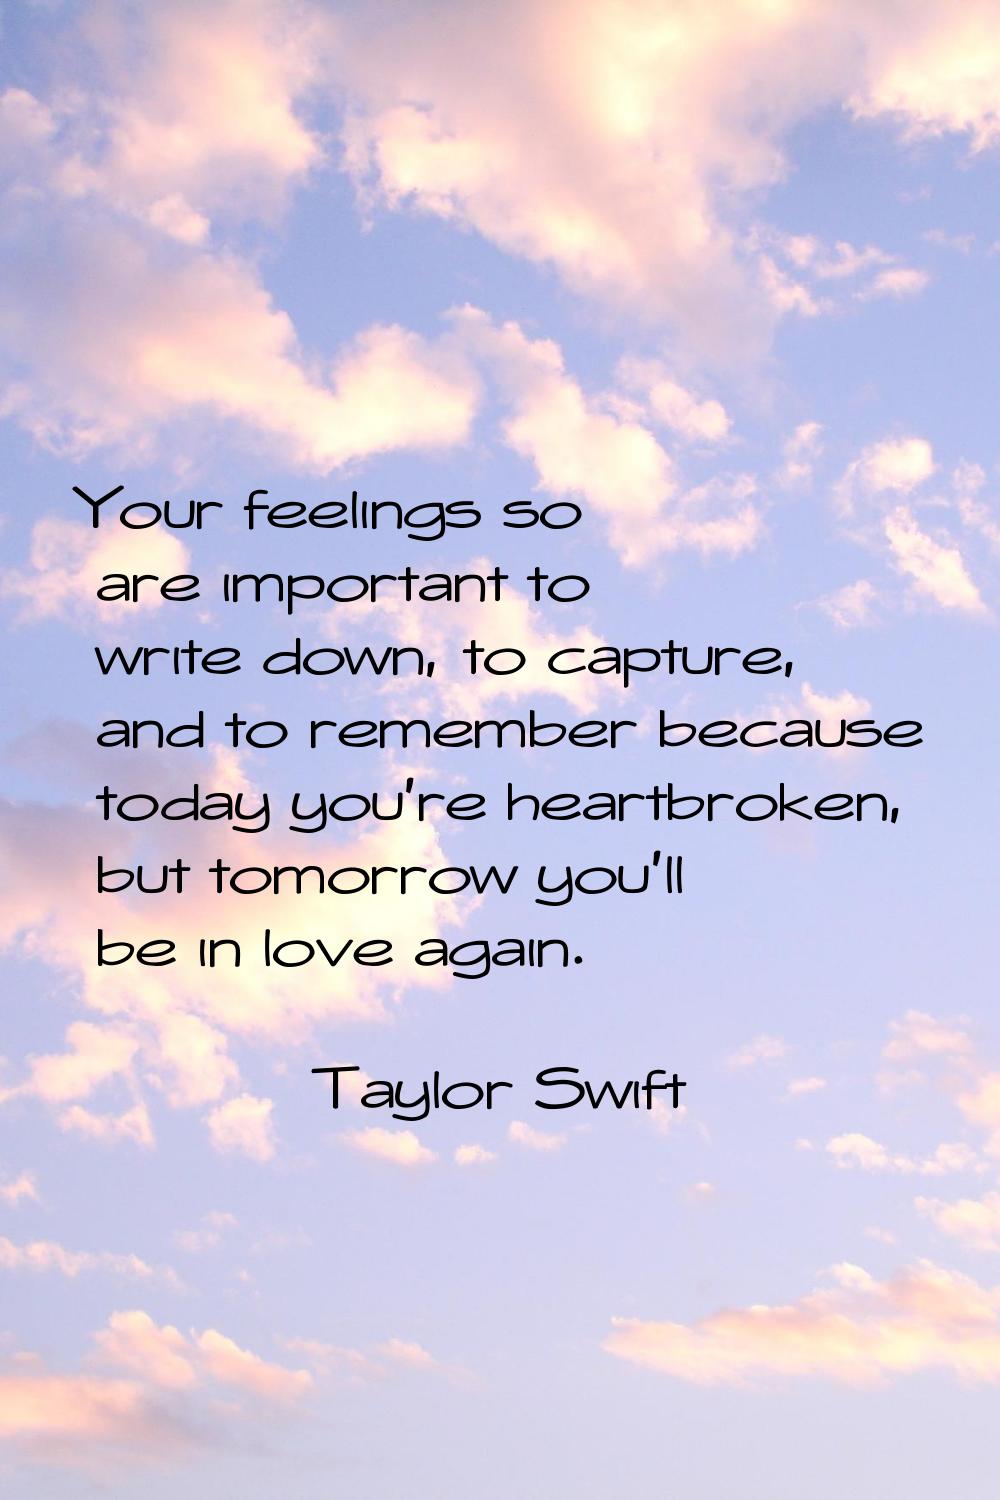 Your feelings so are important to write down, to capture, and to remember because today you're hear